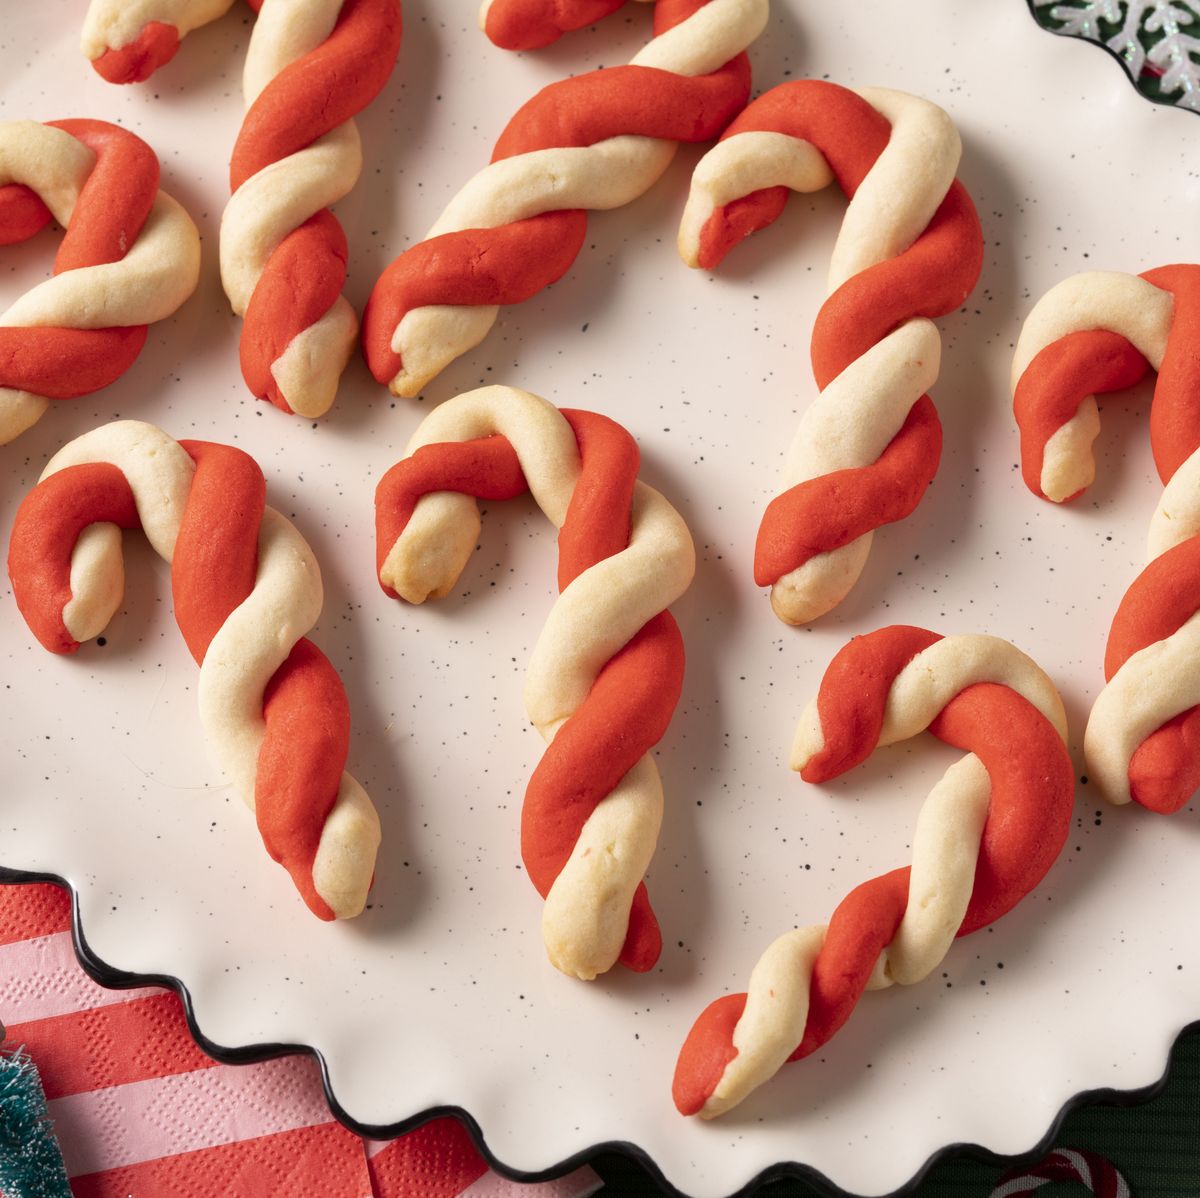 https://hips.hearstapps.com/hmg-prod/images/candy-cane-cookies-recipe-1636735663.jpg?crop=0.668xw:1.00xh;0.141xw,0&resize=1200:*